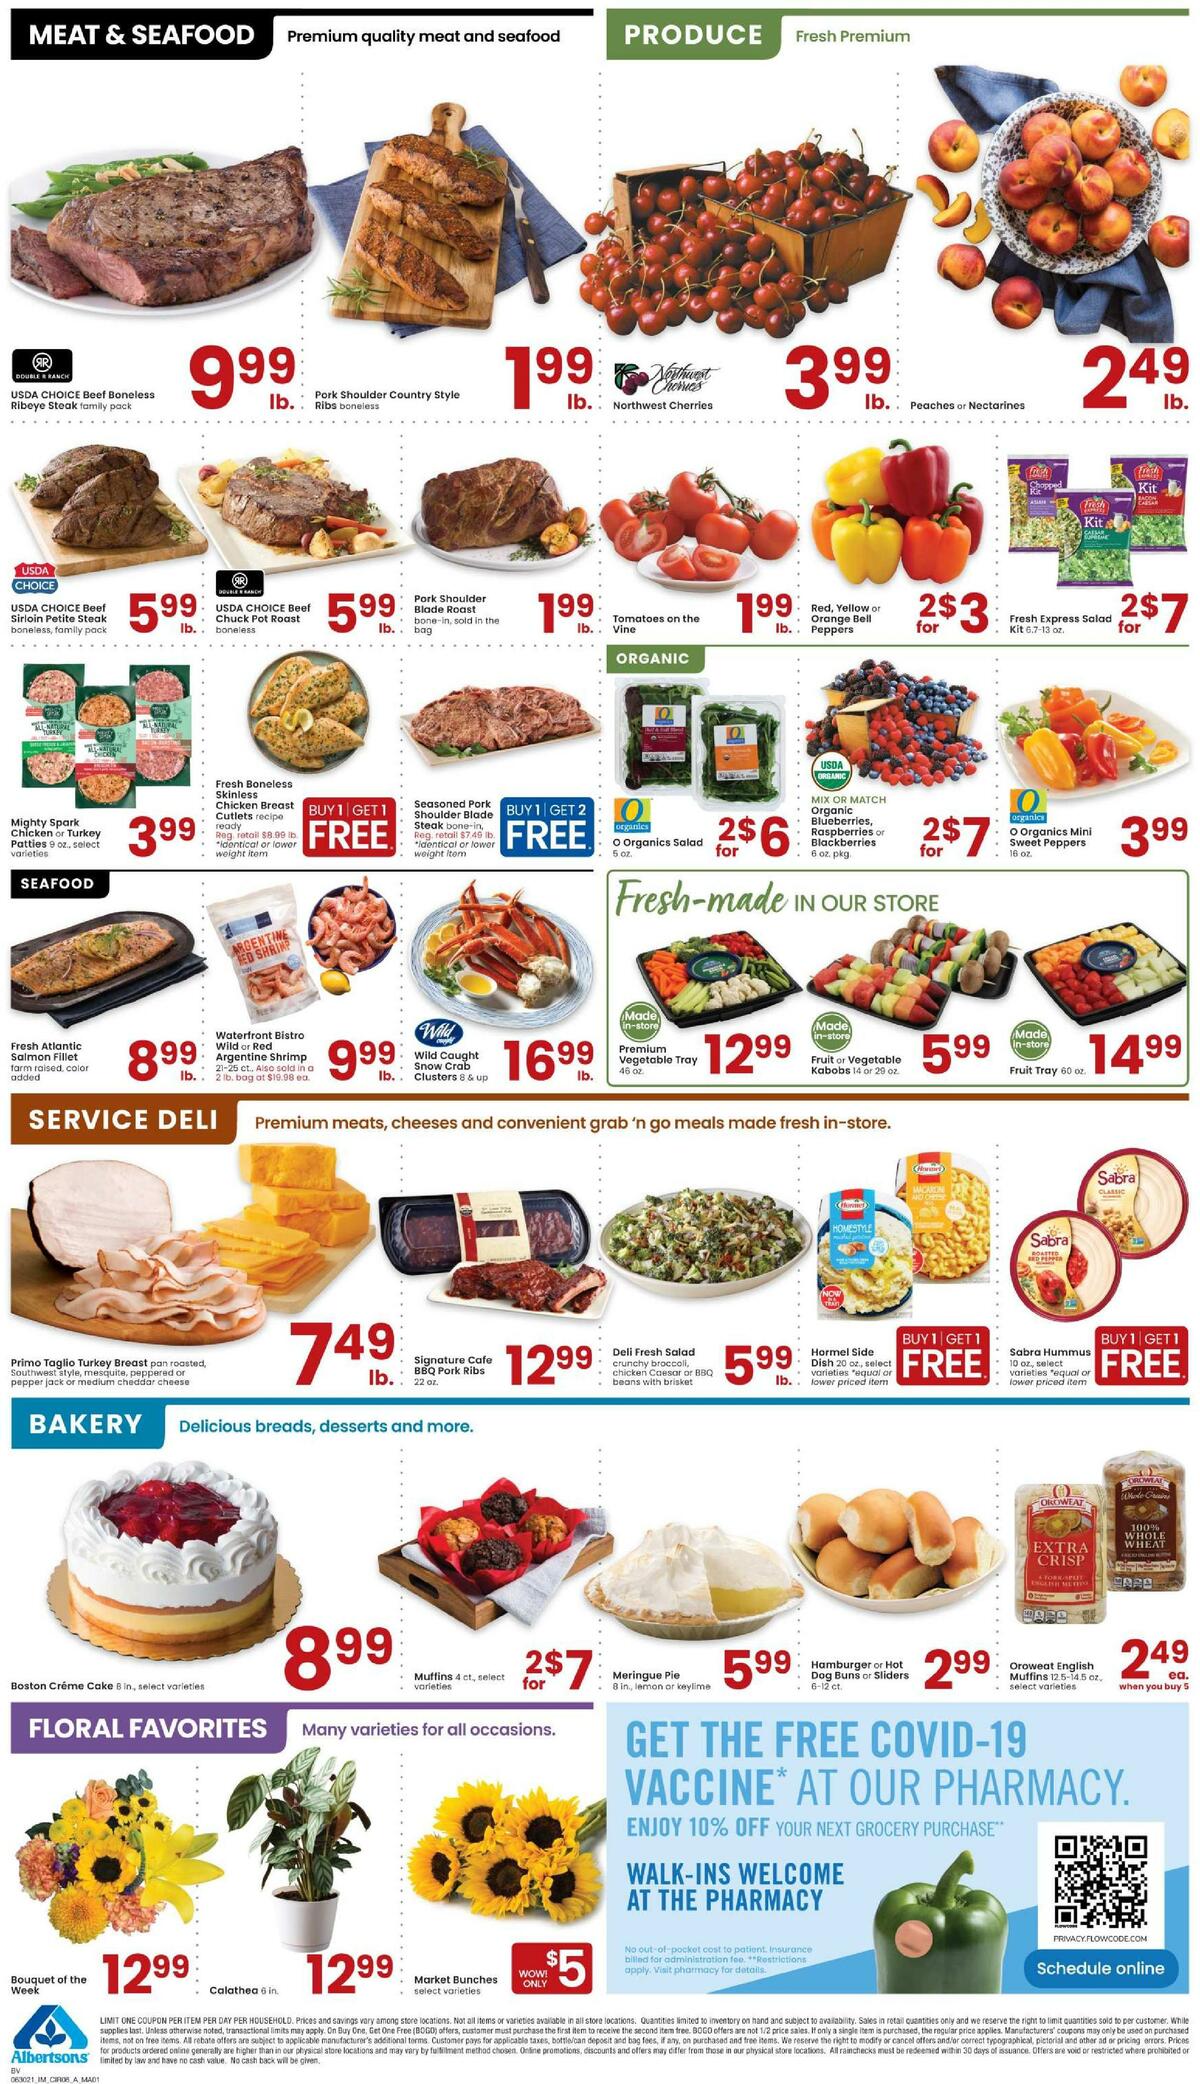 Albertsons Weekly Ad from June 30